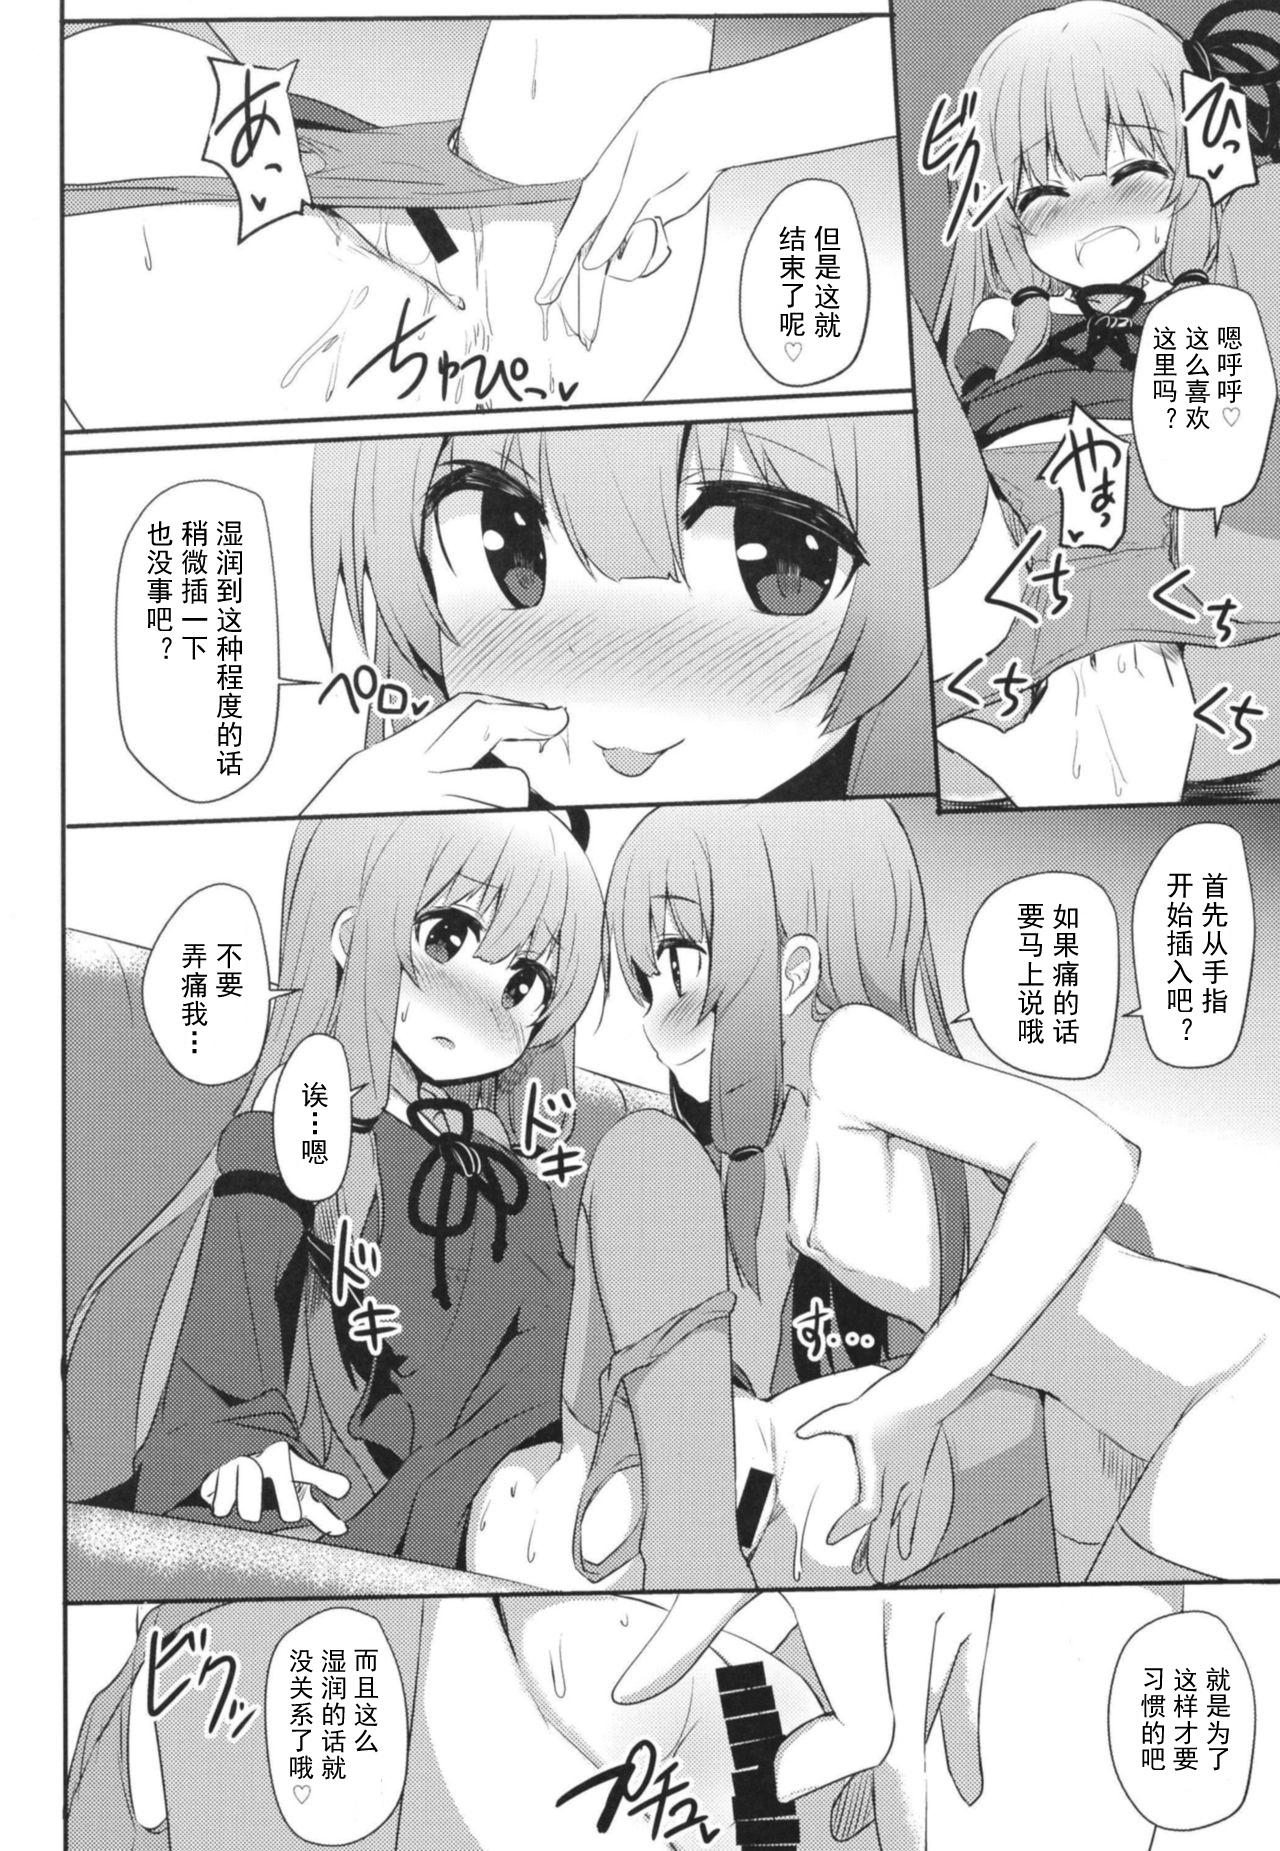 Banging [Milk Pudding (Jamcy)] Akane-chan Challenge! 4-kaime (VOICEROID) [Chinese] [古早个人汉化] [Digital] - Voiceroid Amateurs - Page 6